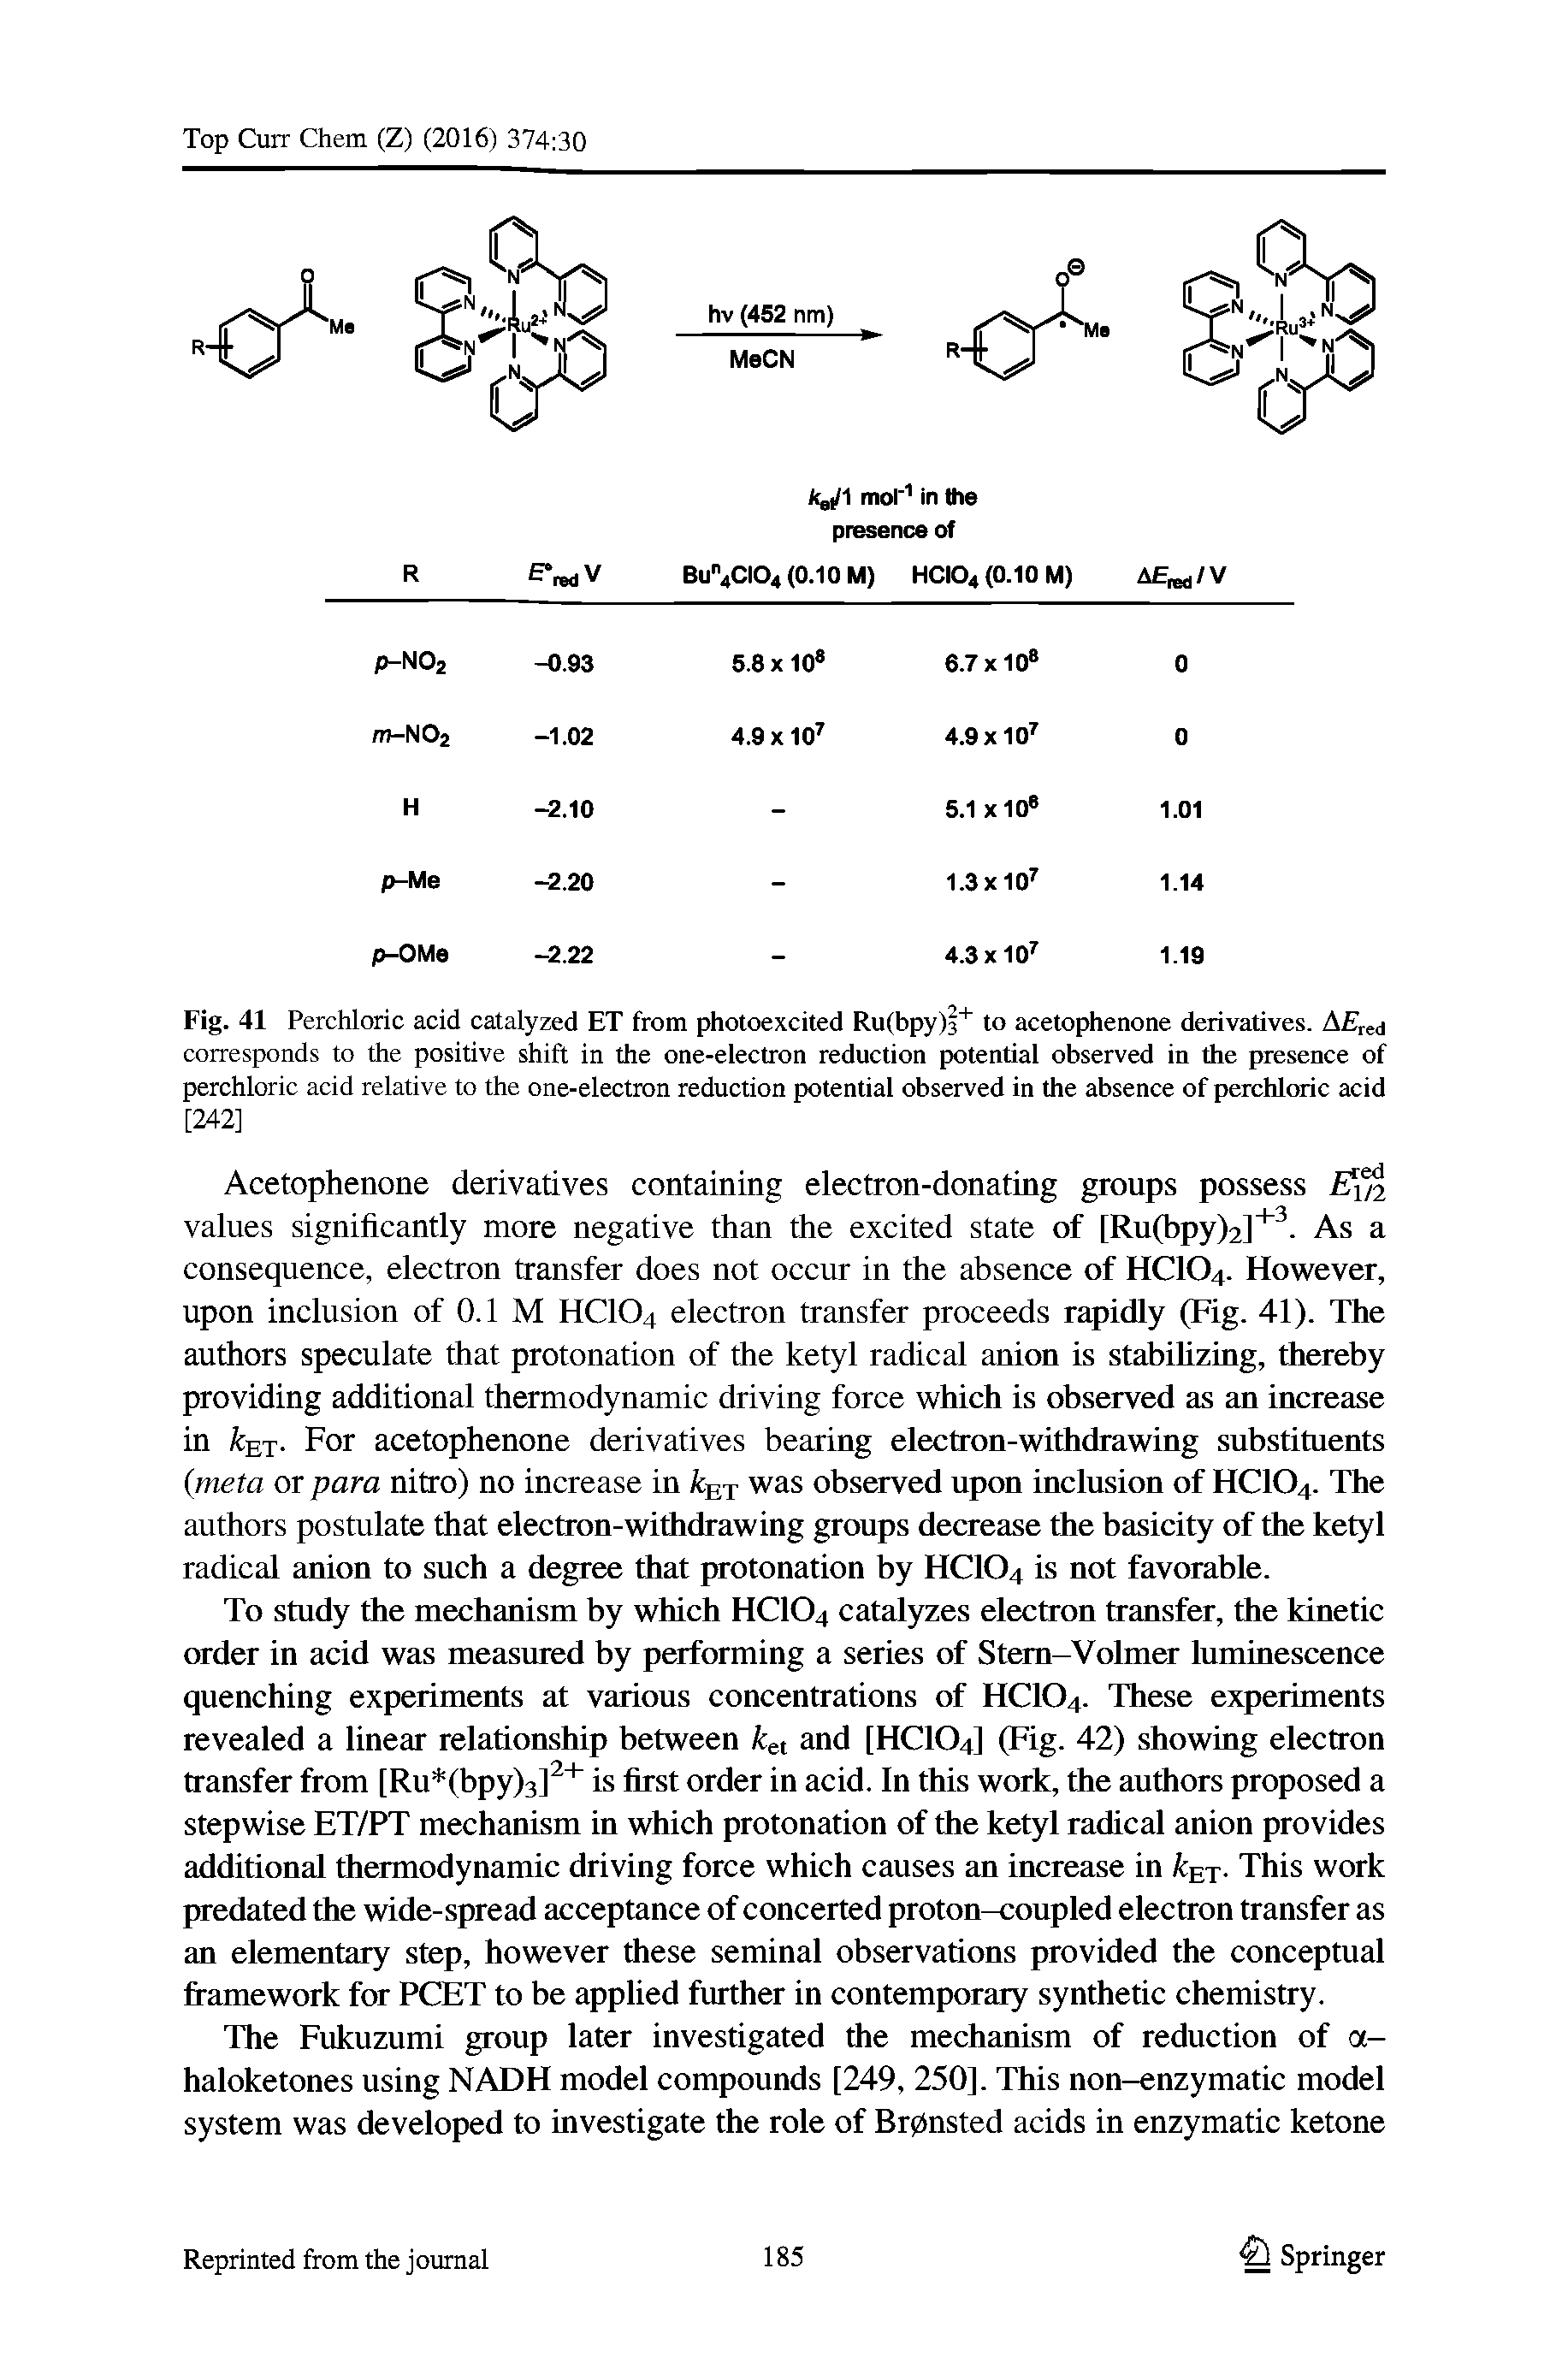 Fig. 41 Perchloric acid catalyzed ET from photoexcited Ru(bpy) to acetophenone derivatives. A r d corresponds to the positive shift in the one-electron reduction potential observed in the presence of perchloric acid relative to the one-electron reduction potential observed in the absence of perchloric acid...